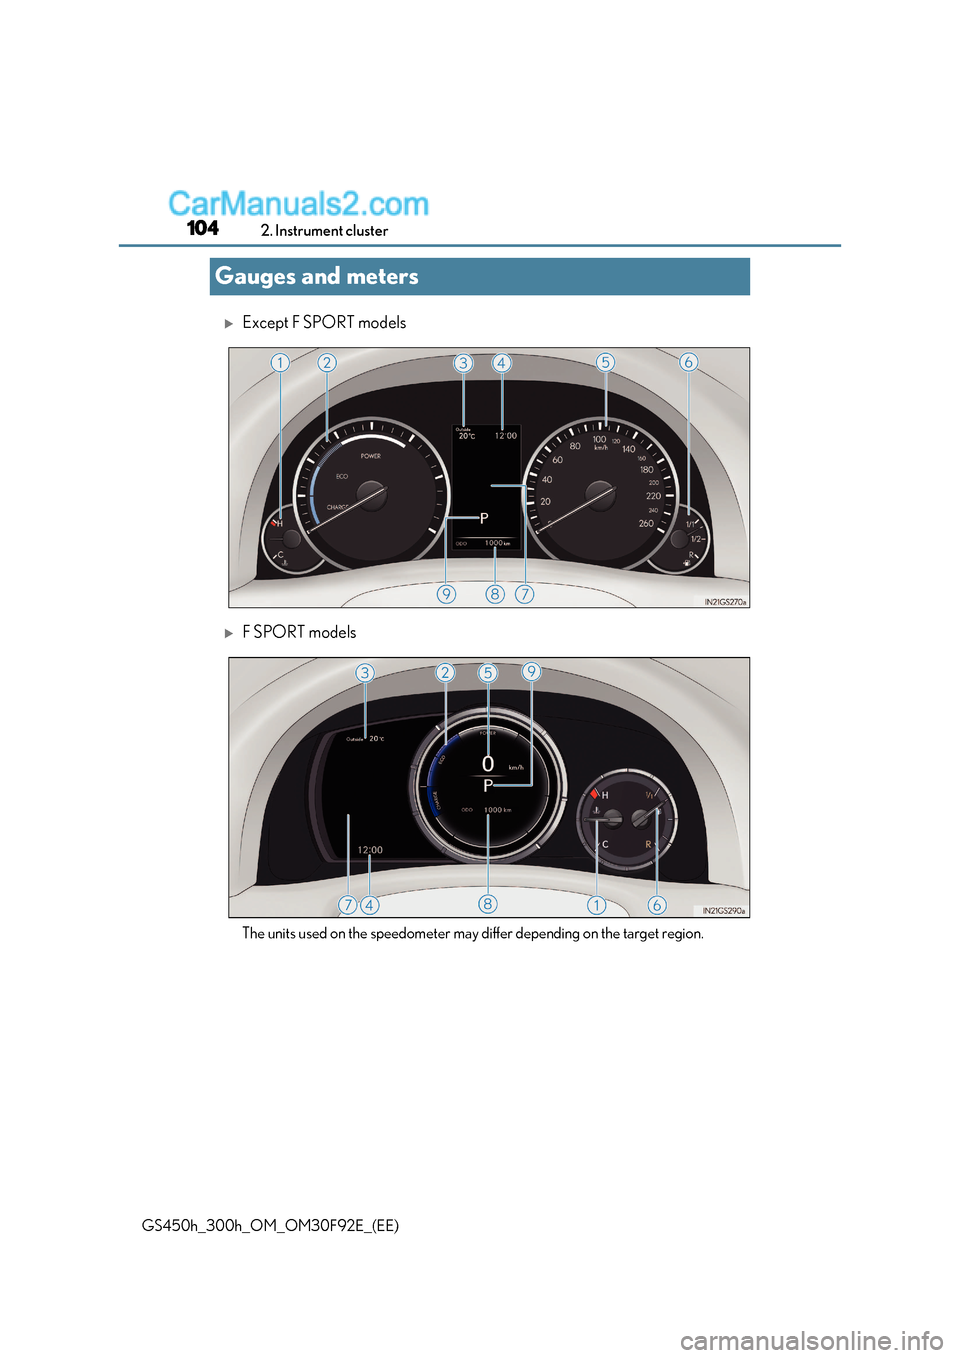 Lexus GS300h 2017  Owners Manual 1042. Instrument cluster
GS450h_300h_OM_OM30F92E_(EE)
Gauges and meters
Except F SPORT models
F SPORT models 
The units used on the speedometer may differ depending on the target region.    